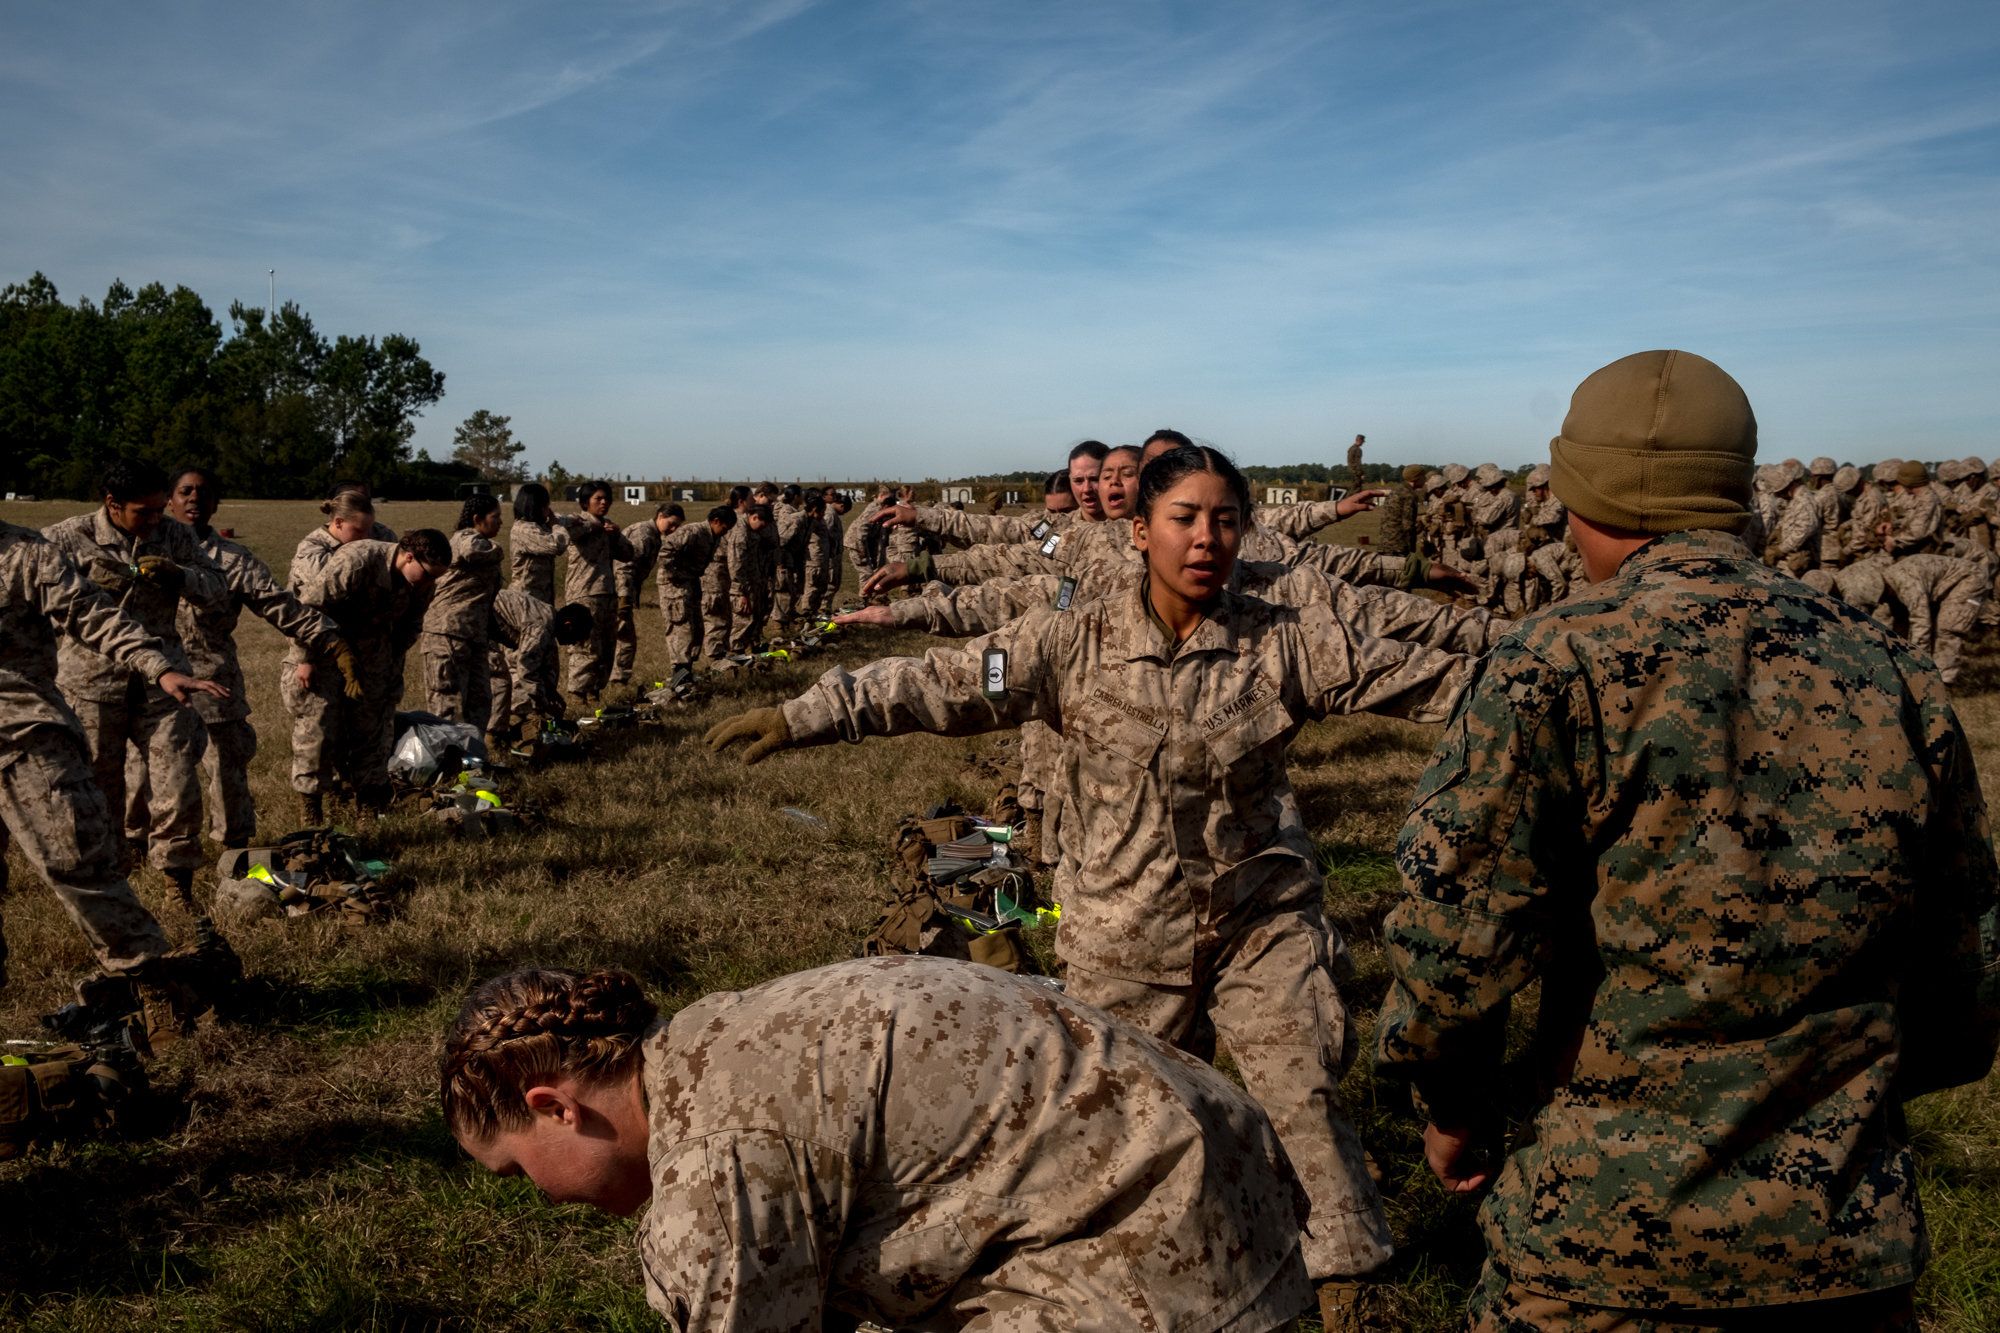 Women at a Marine Boot Camp Represent an Identity Crisis for the Corps